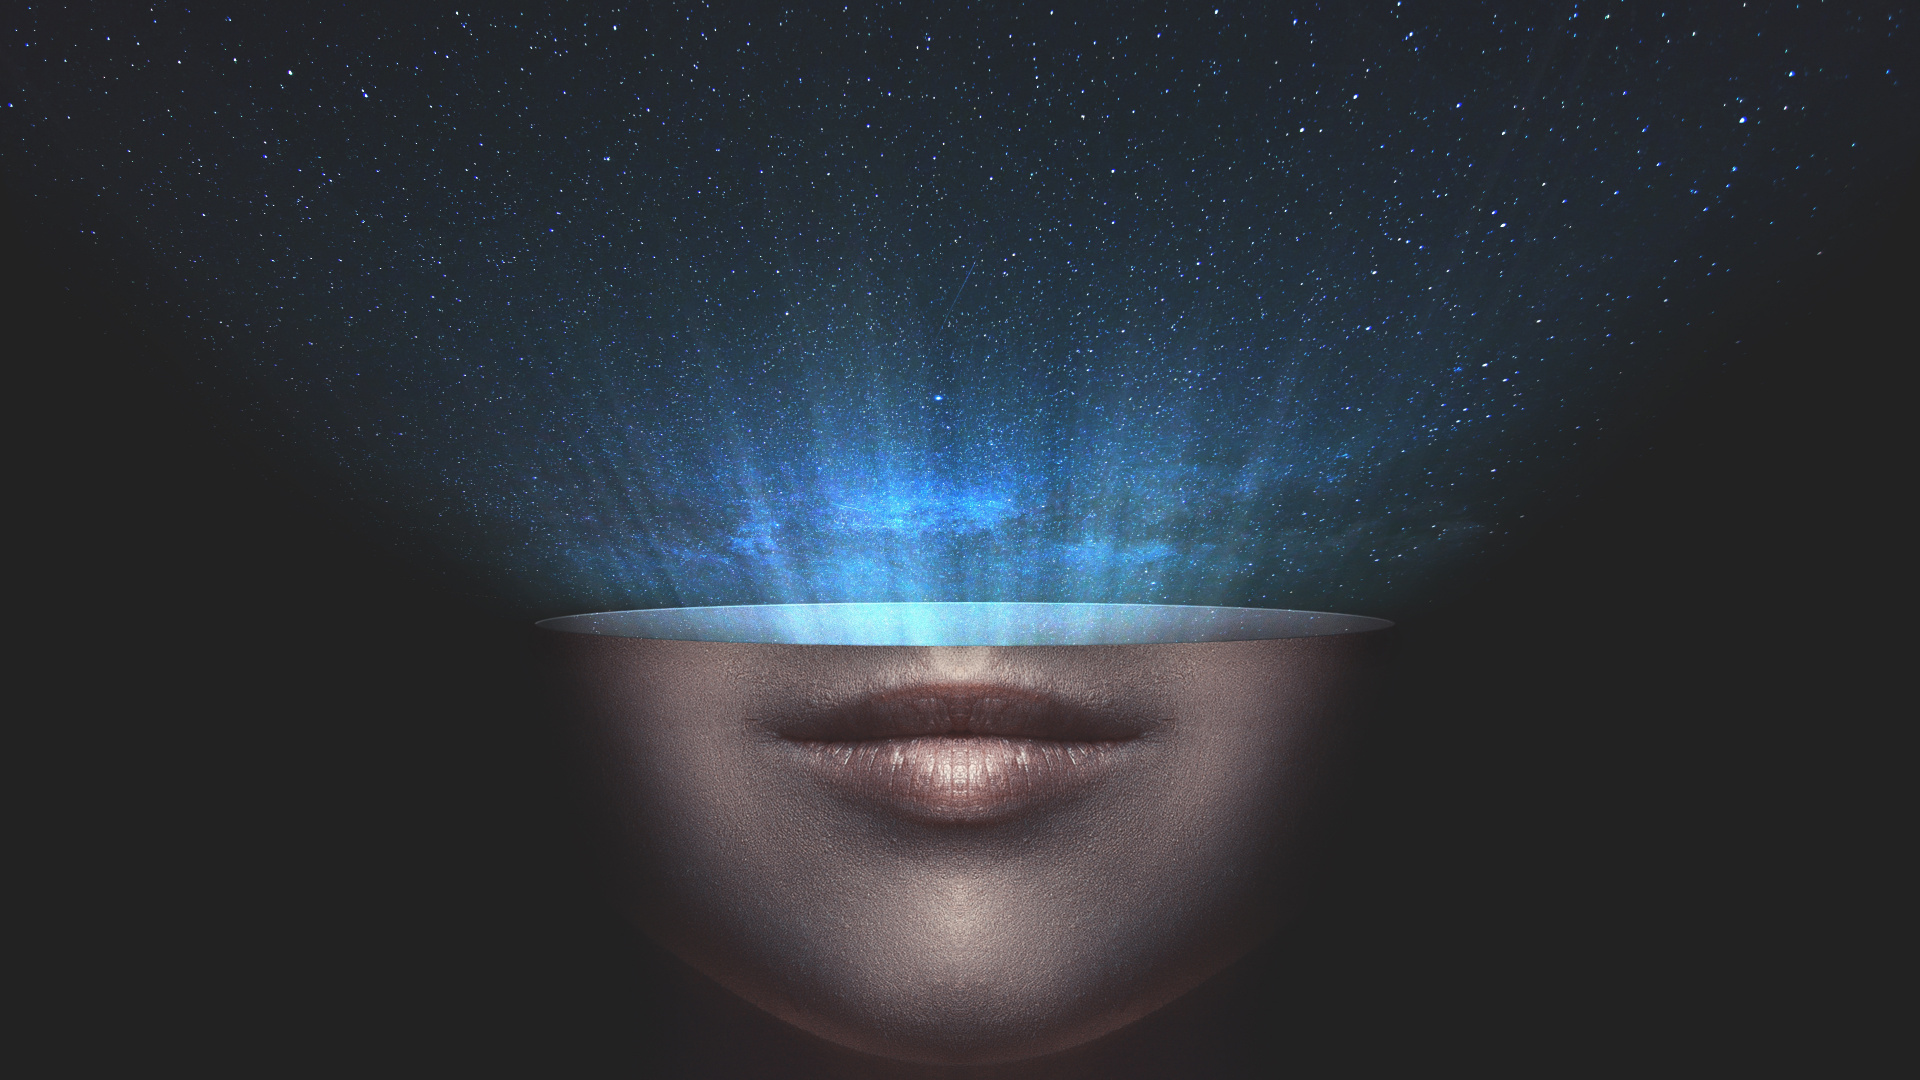 Persons Face With Blue and White Stars. Wallpaper in 1920x1080 Resolution